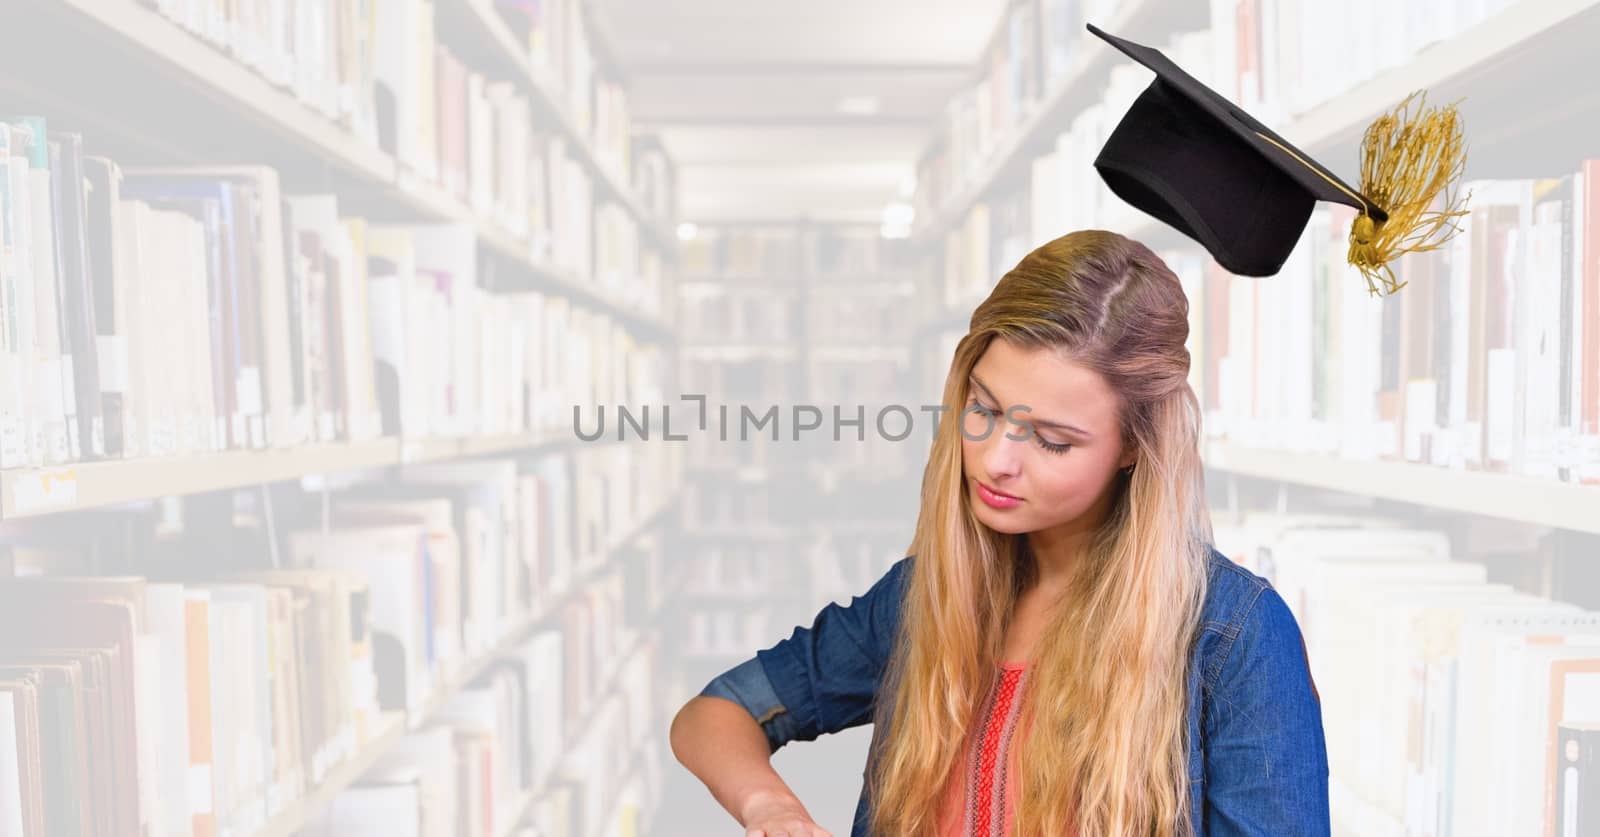 Digital composite of Student woman in education library with graduation hat